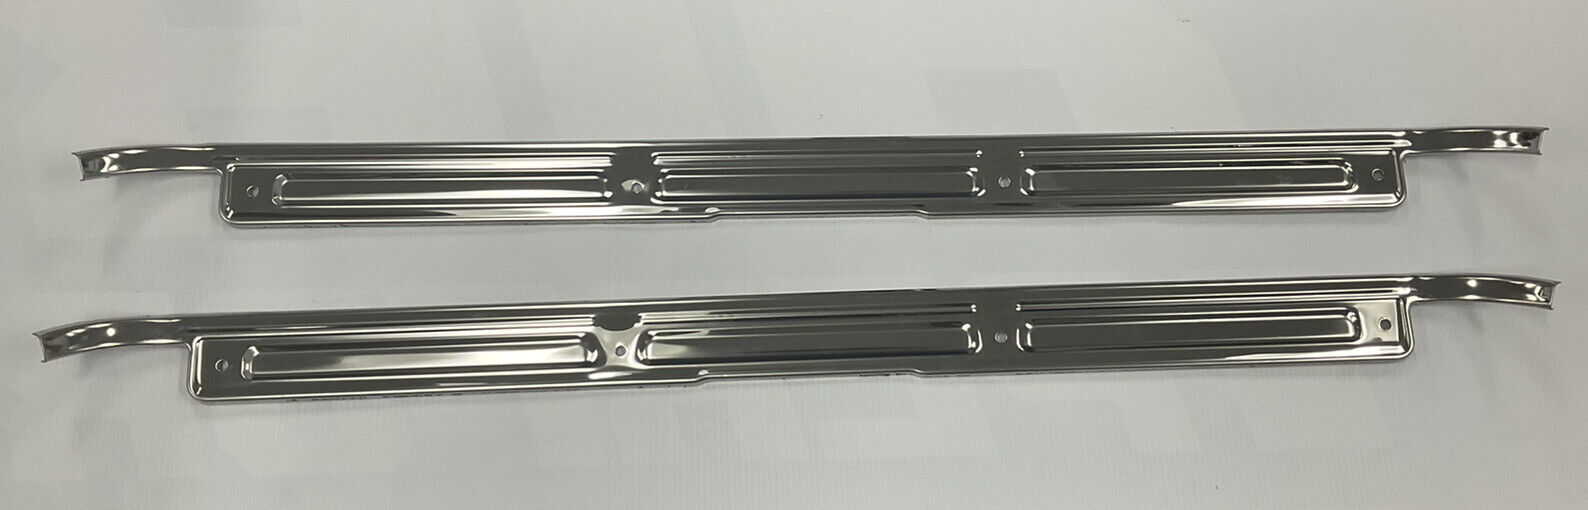 1967 68 69 70 71 72 Chevy C10 GMC Truck STAINLESS Door Sill Plates Pair hardware